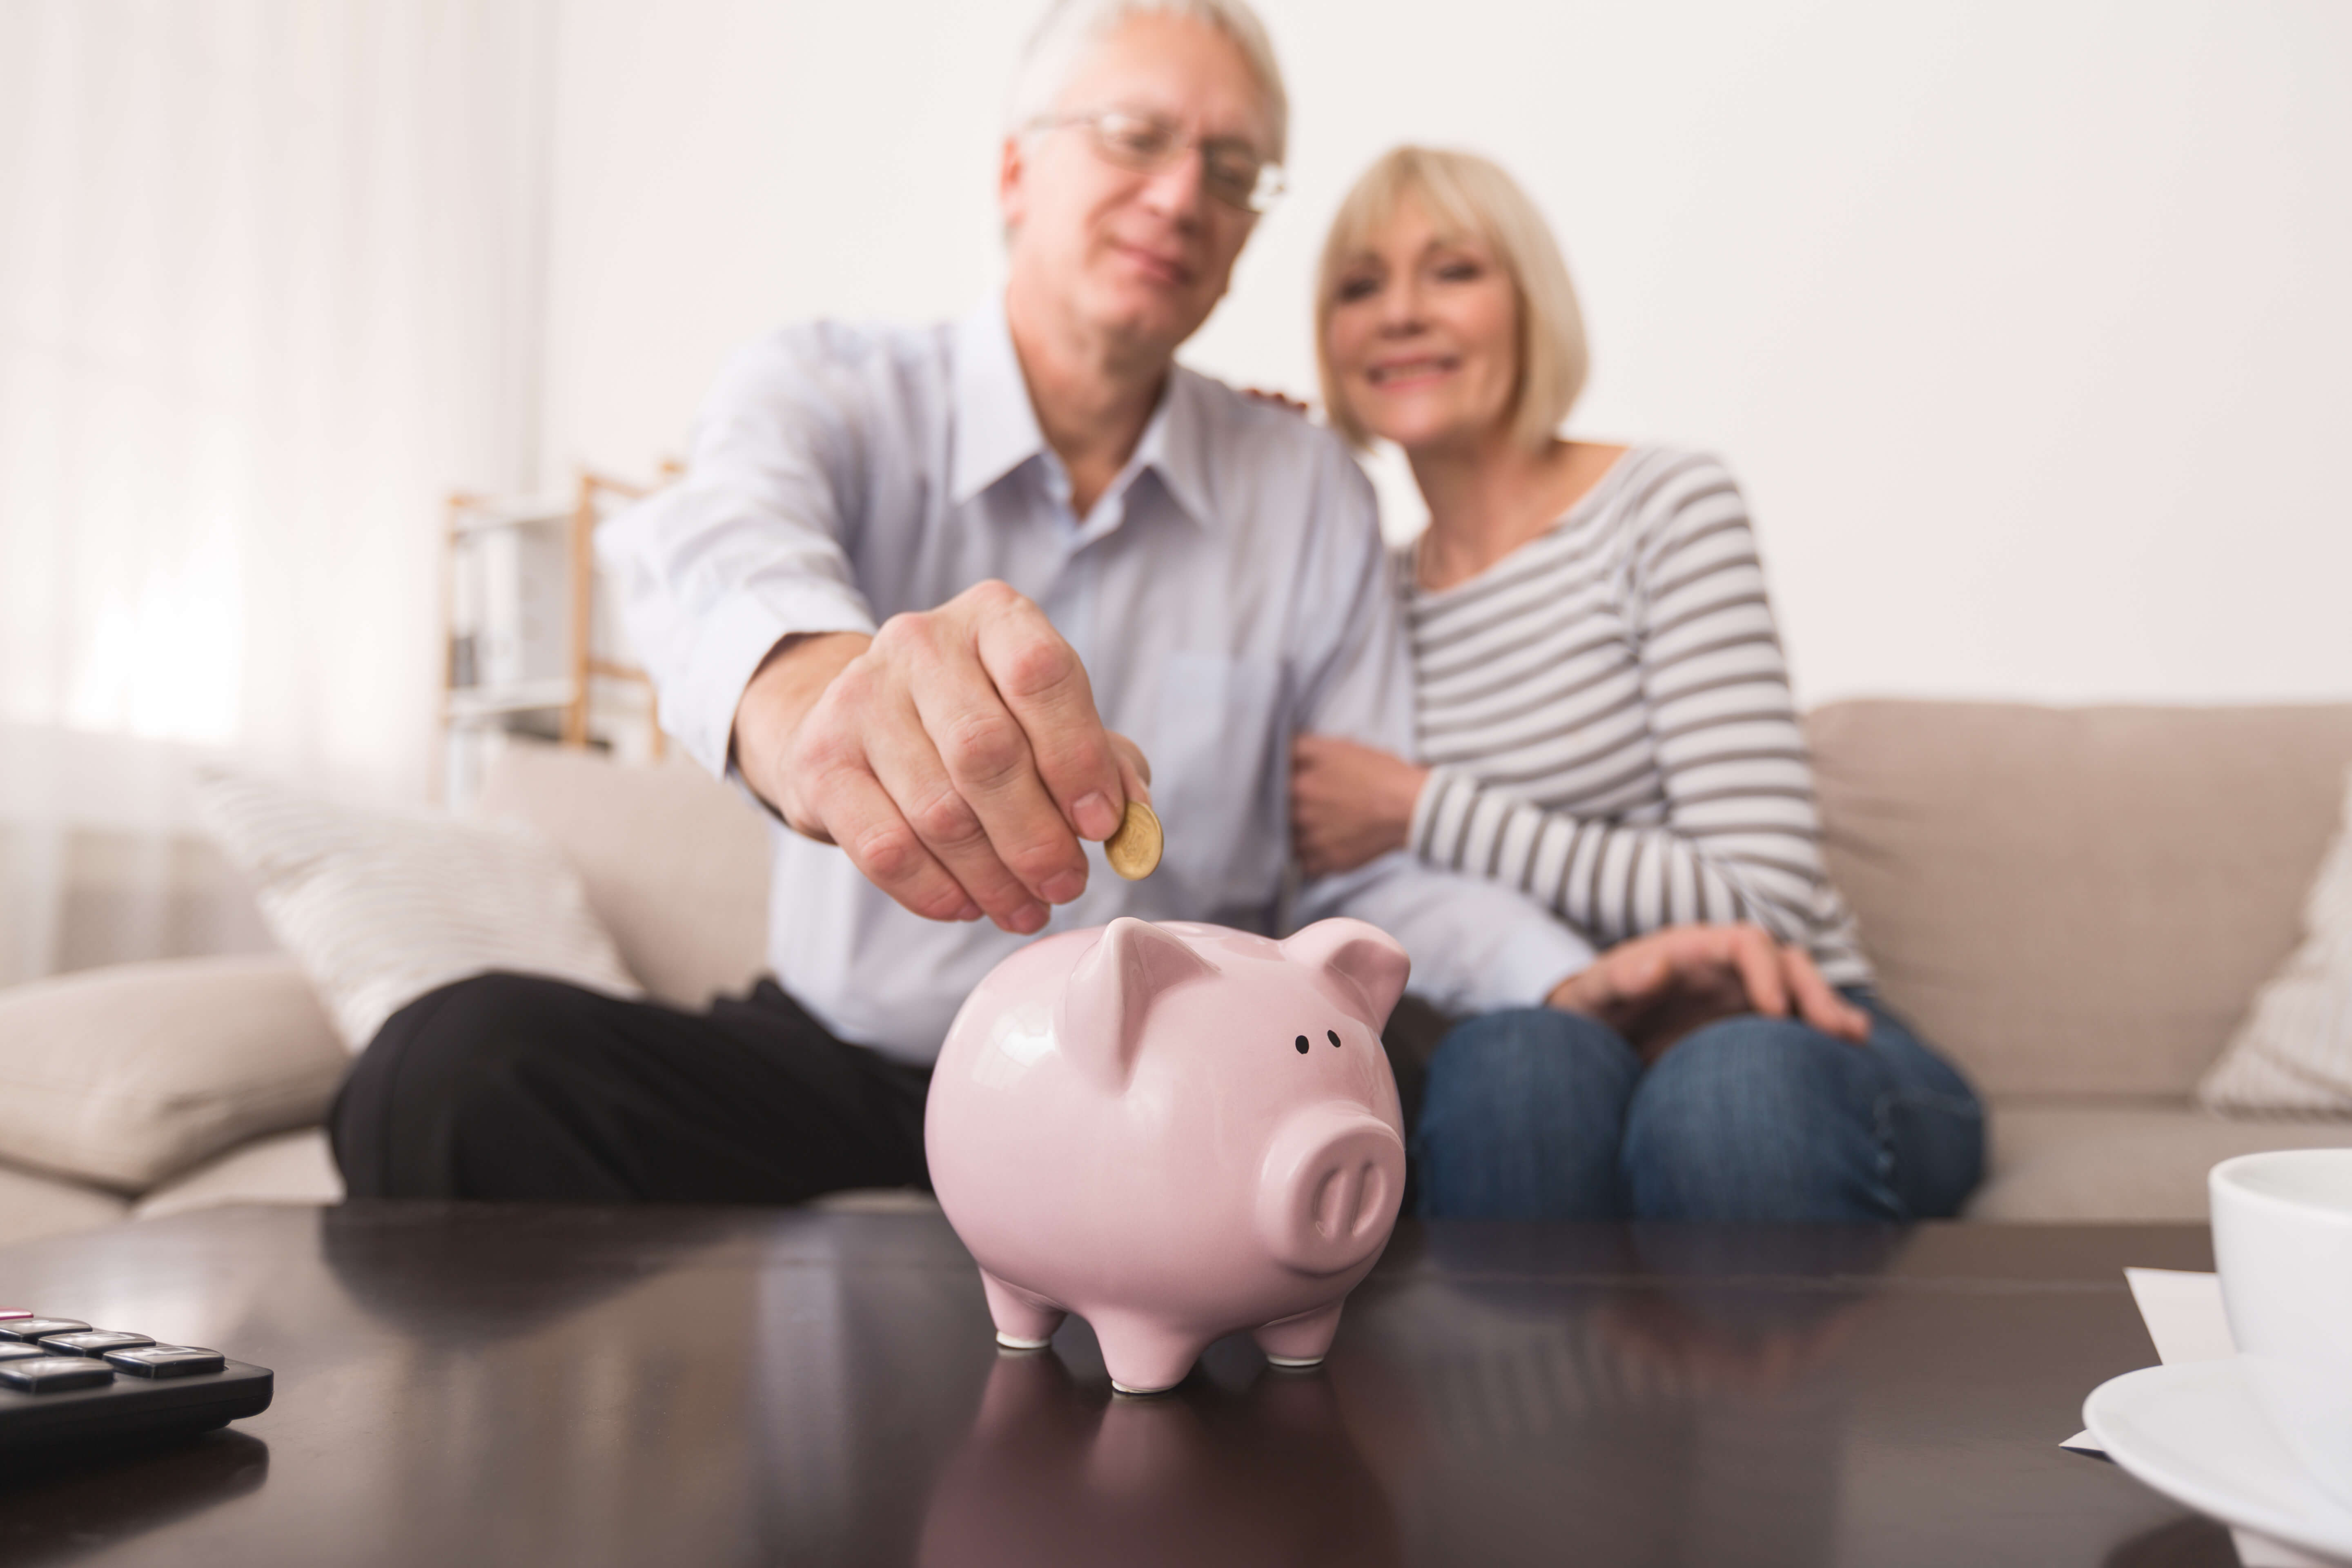 a man and woman sitting on a couch putting a coin into a piggy bank